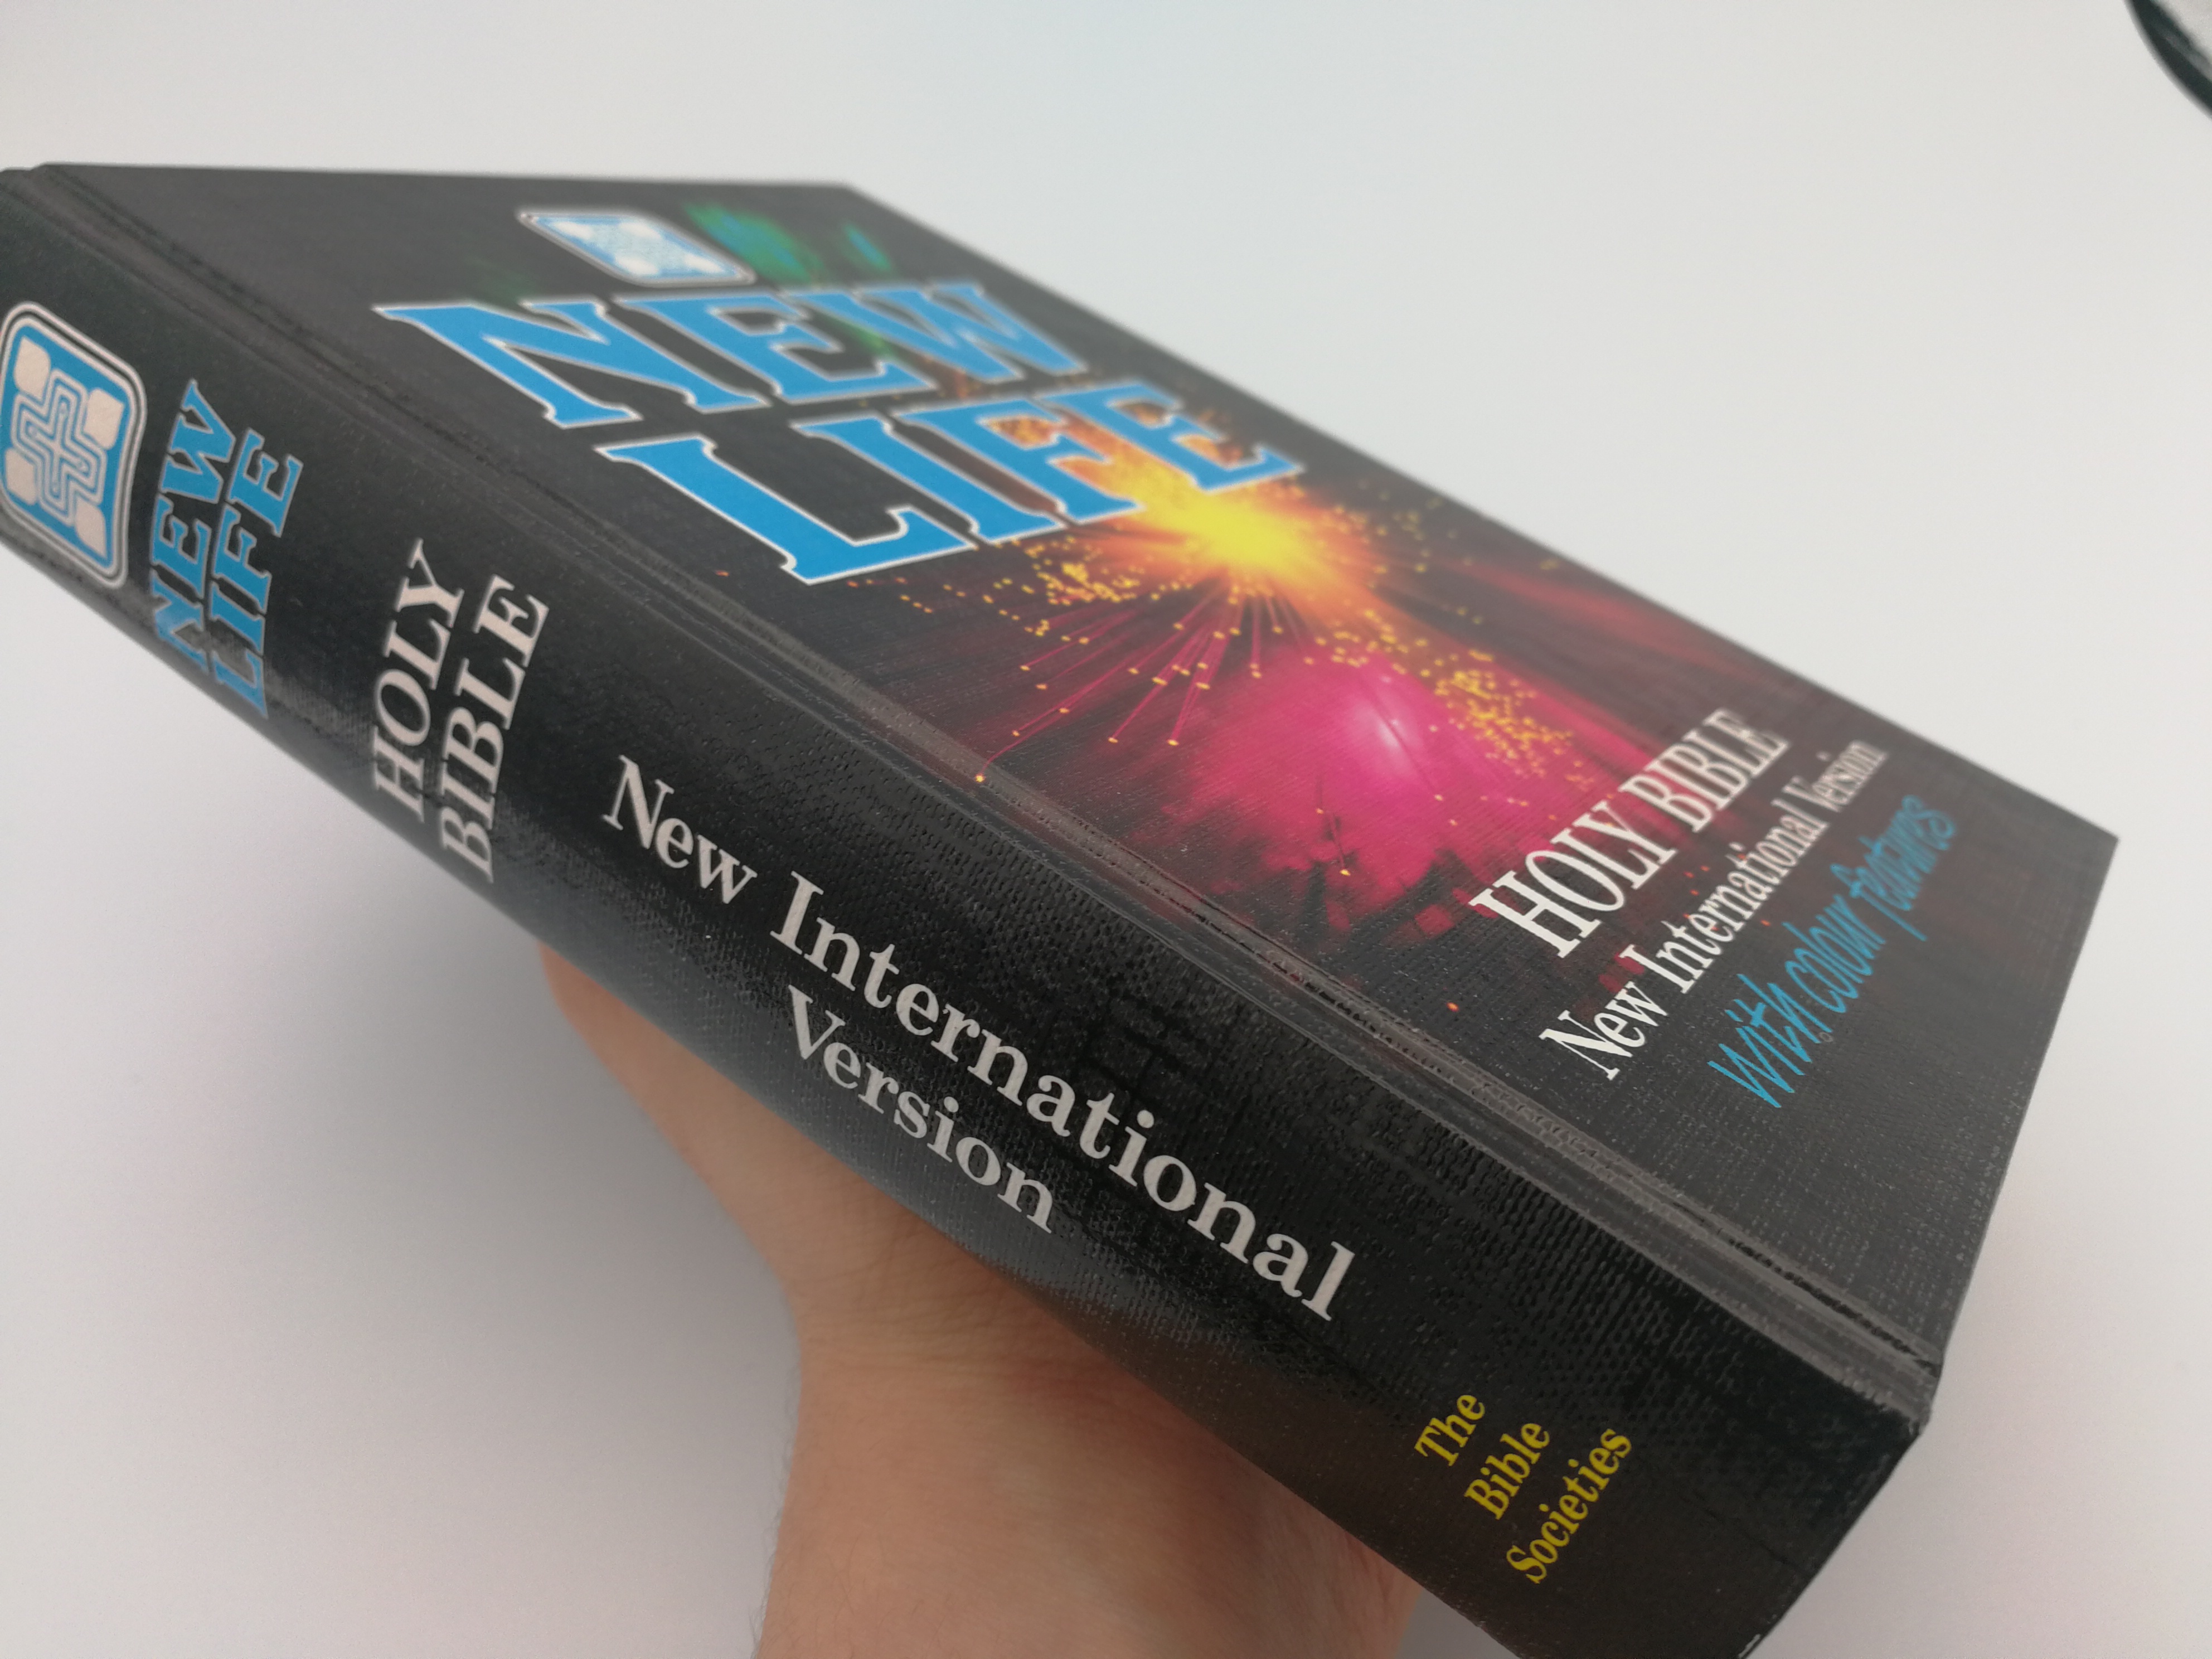 New Life Holy Bible - New International Version with colour features 1